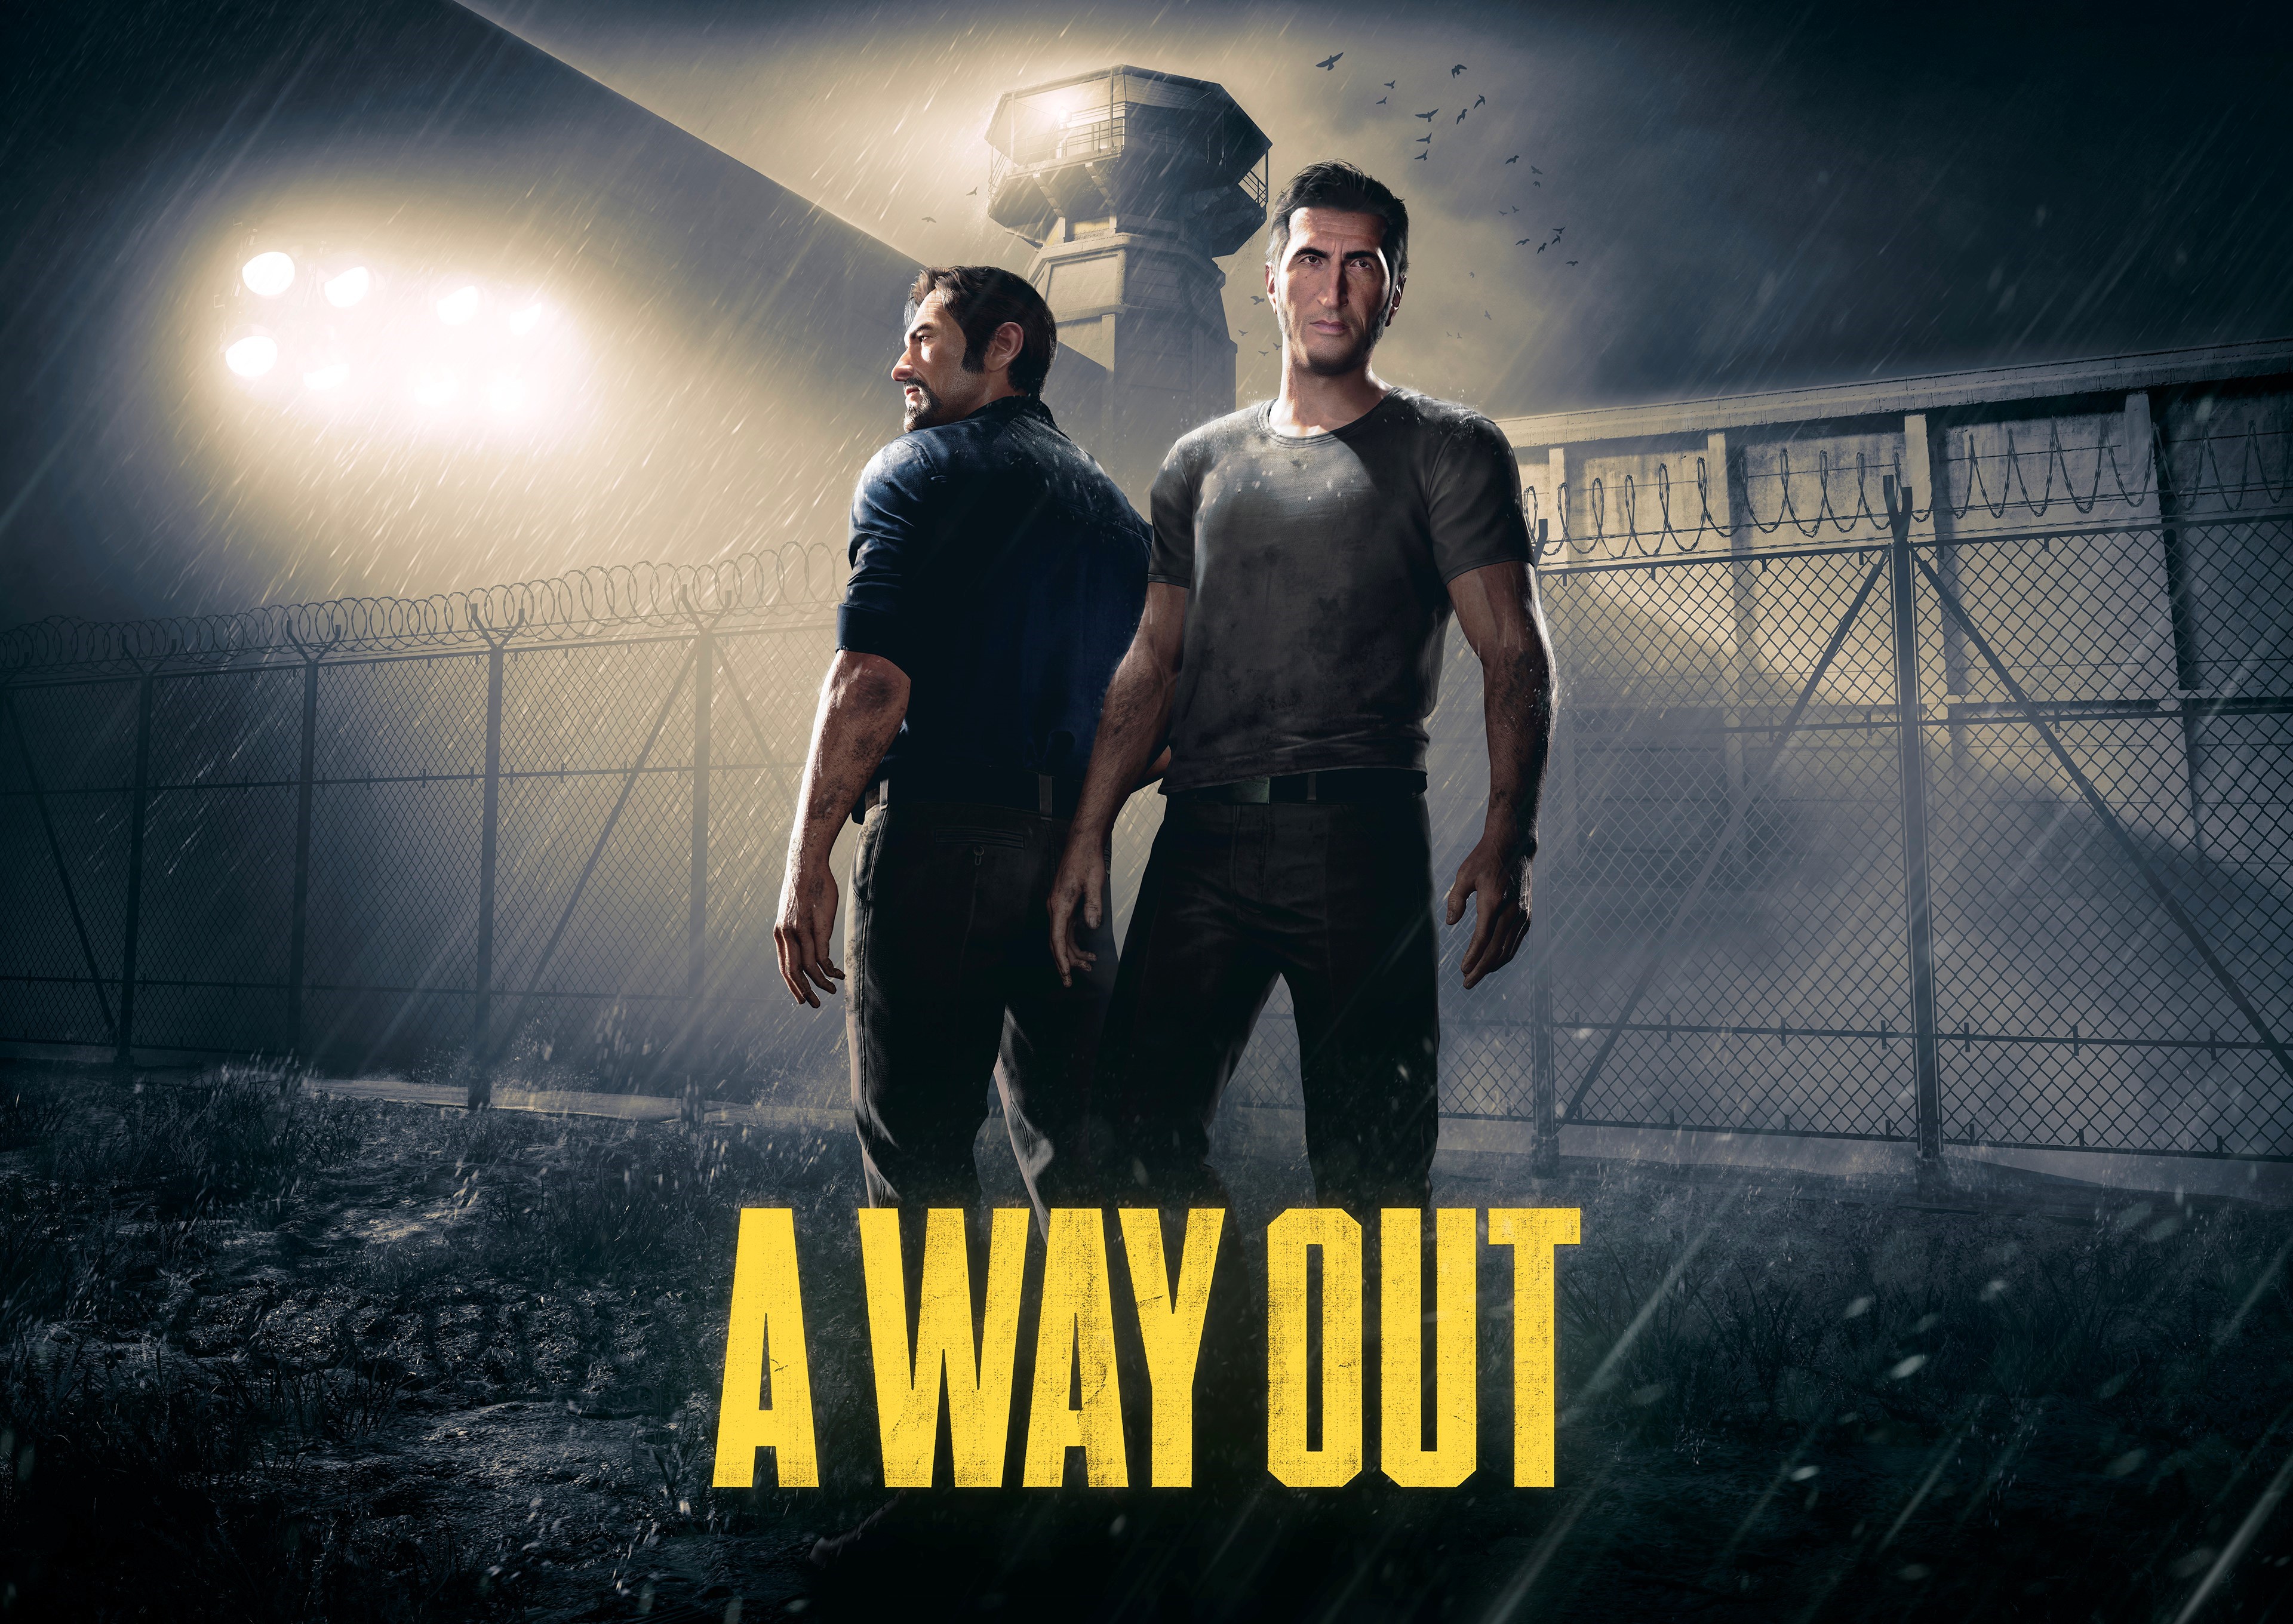 A way out джойстик